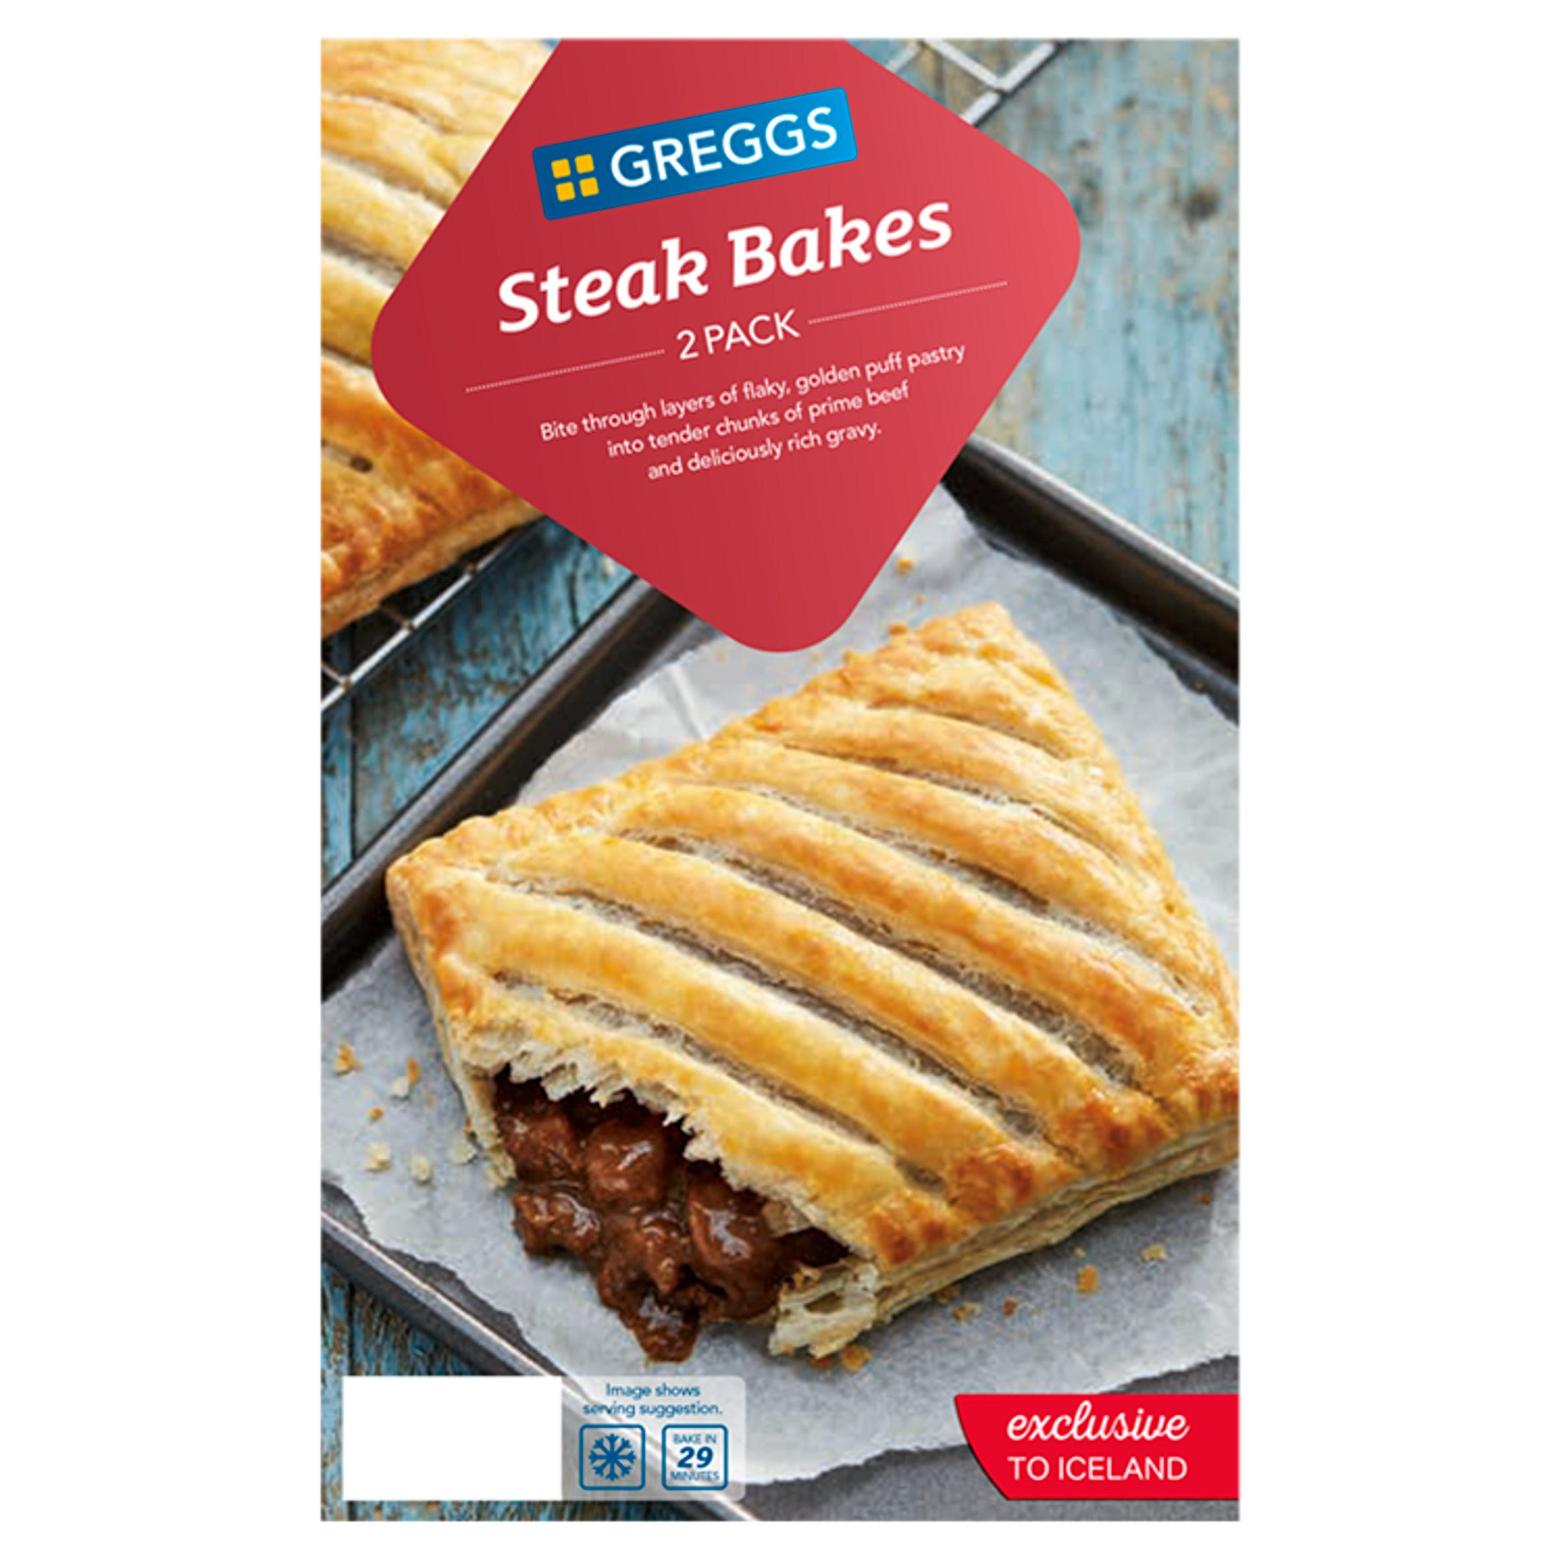 Greggs 2 Steak Bakes 280g offers at £3 in Iceland